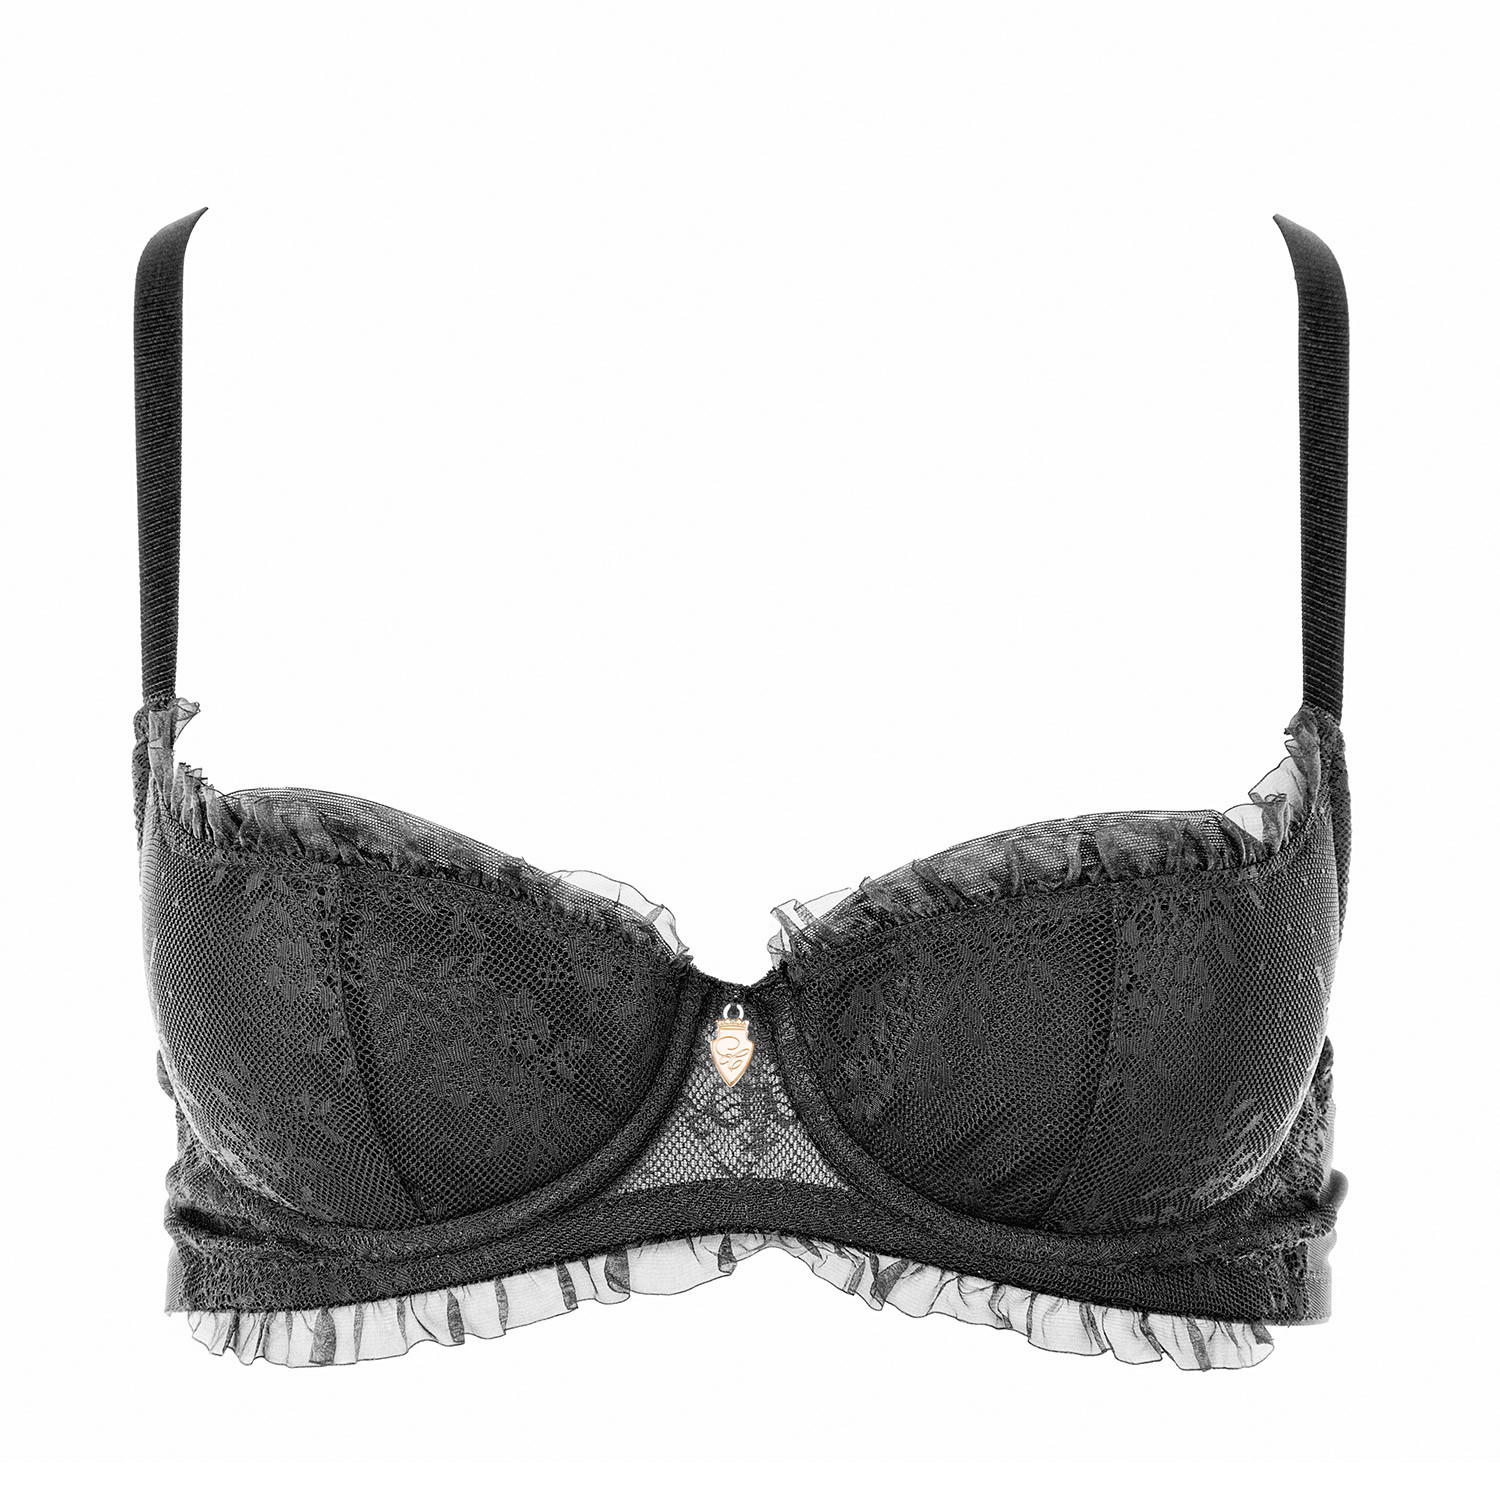 Royal Balconette Bra by Mademoiselle Coco Cavaliere